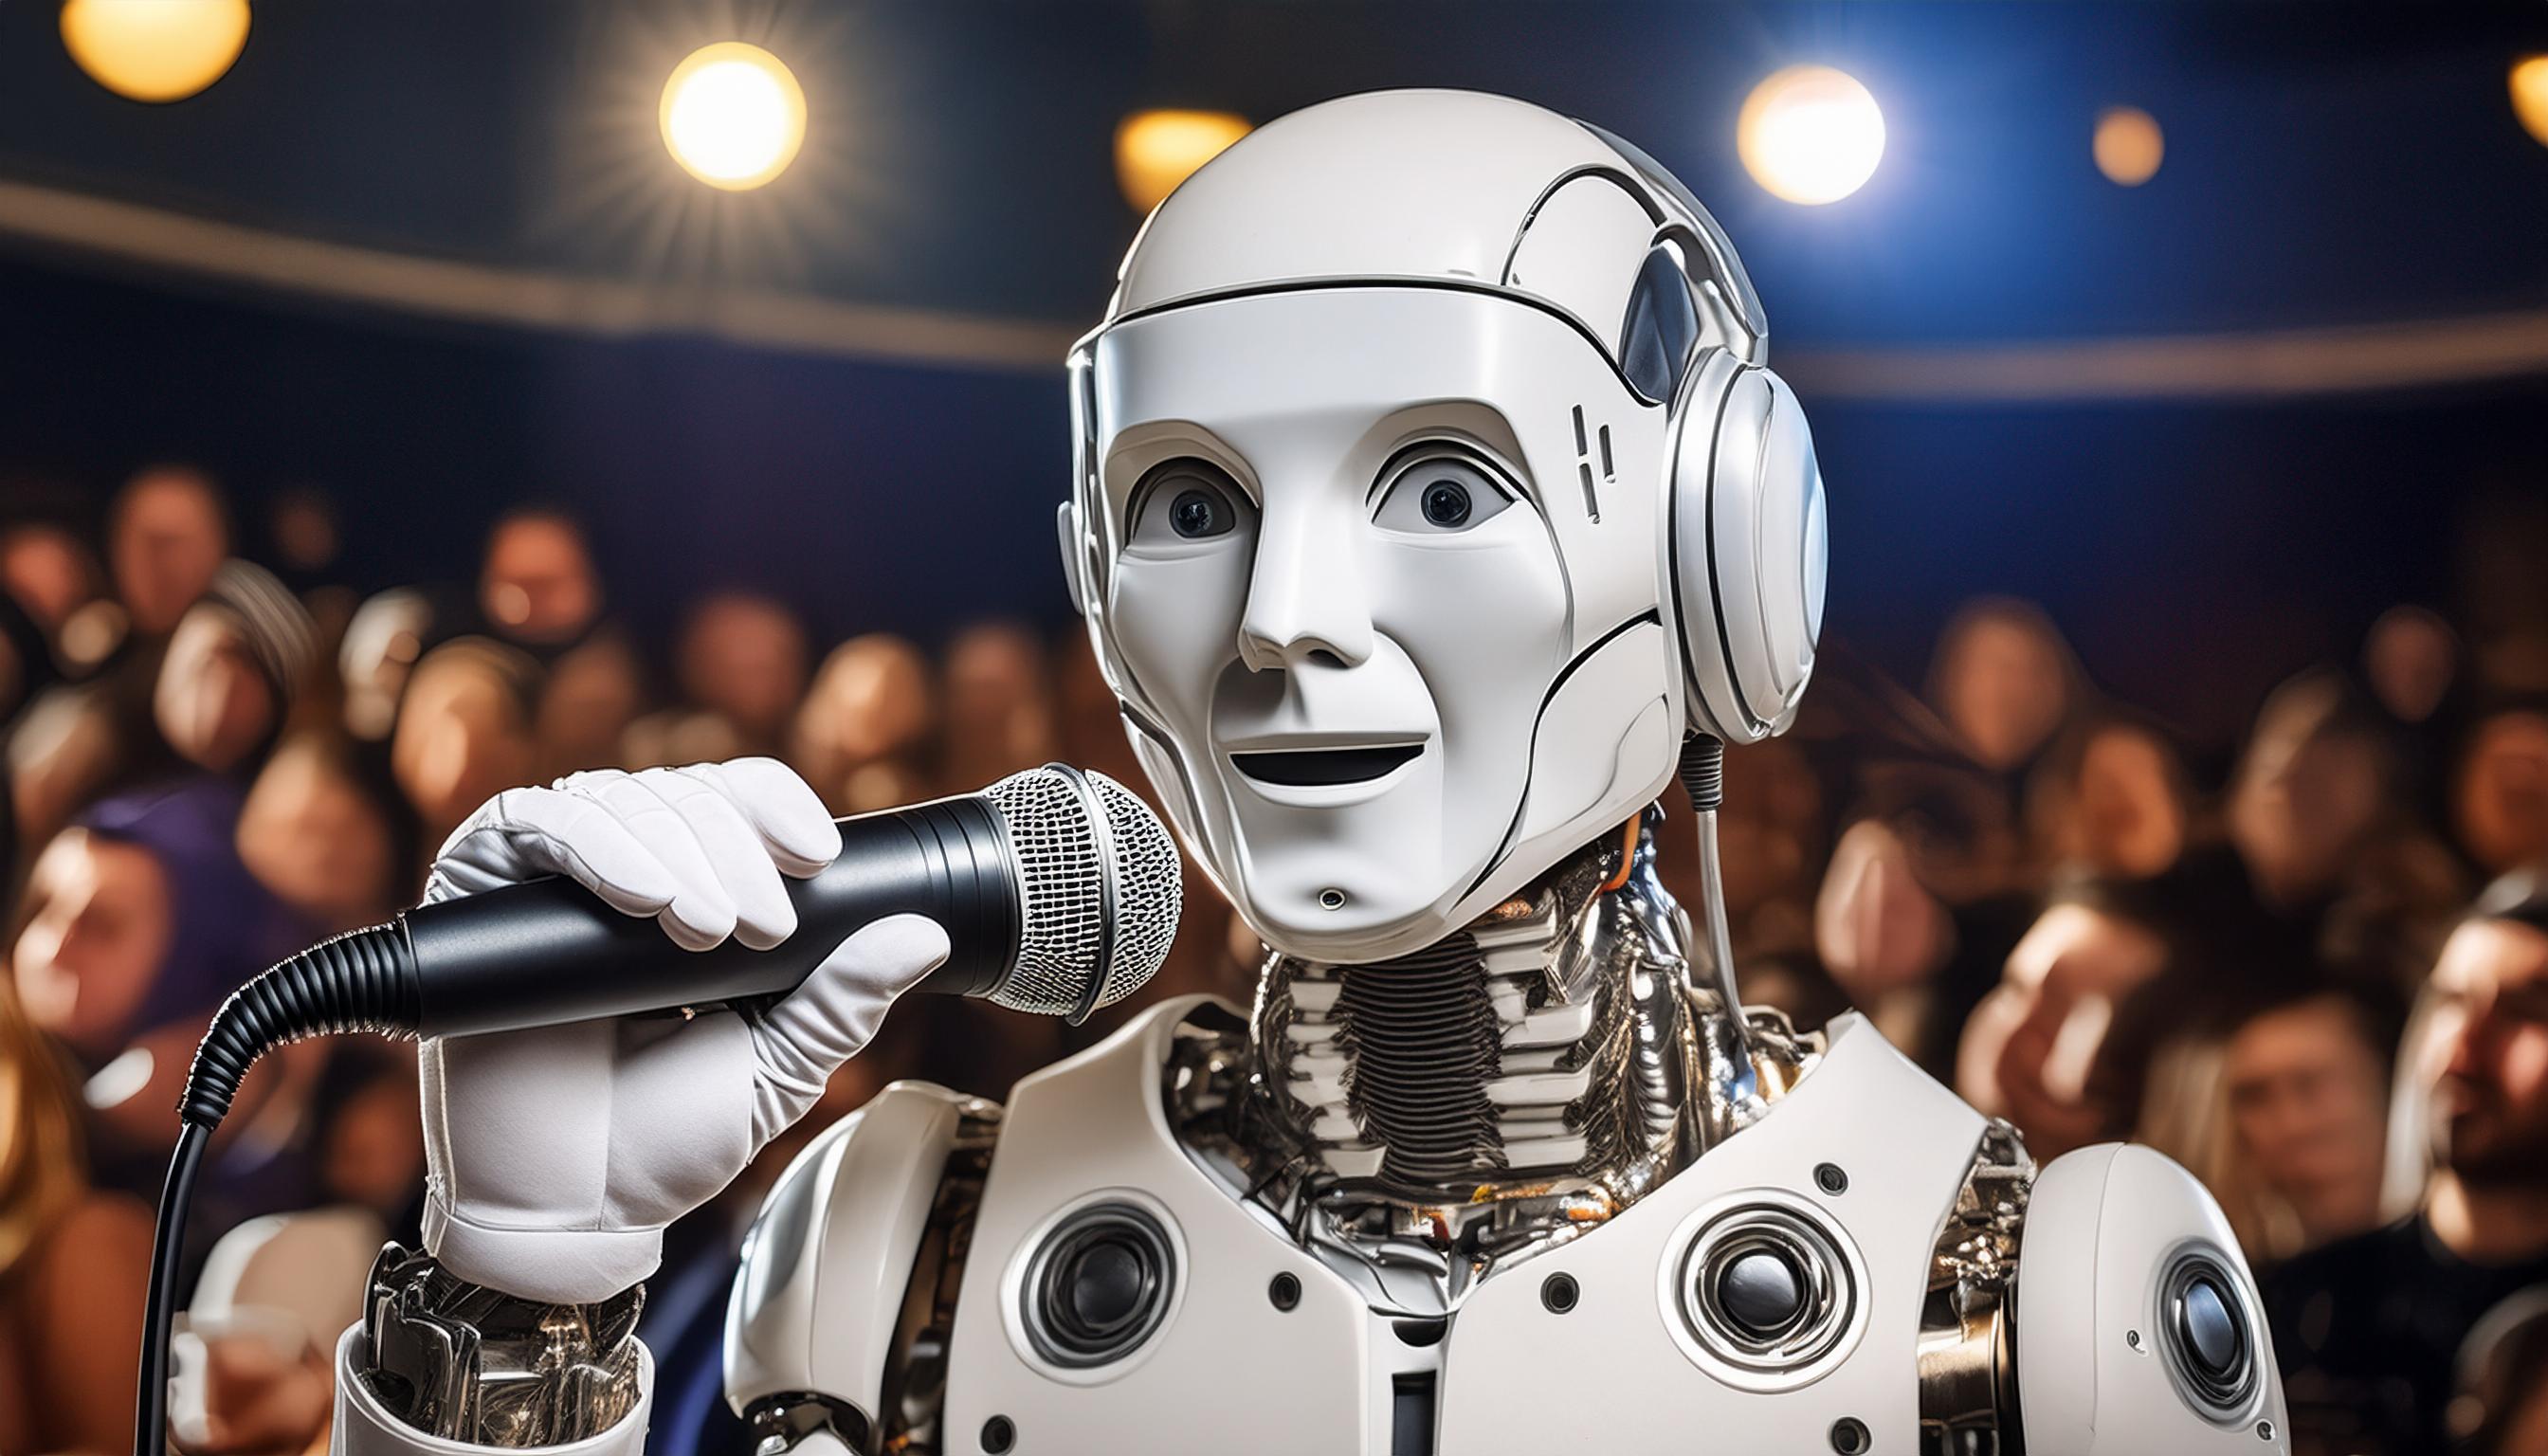 A robot comedian image generated with Adobe Firefly AI